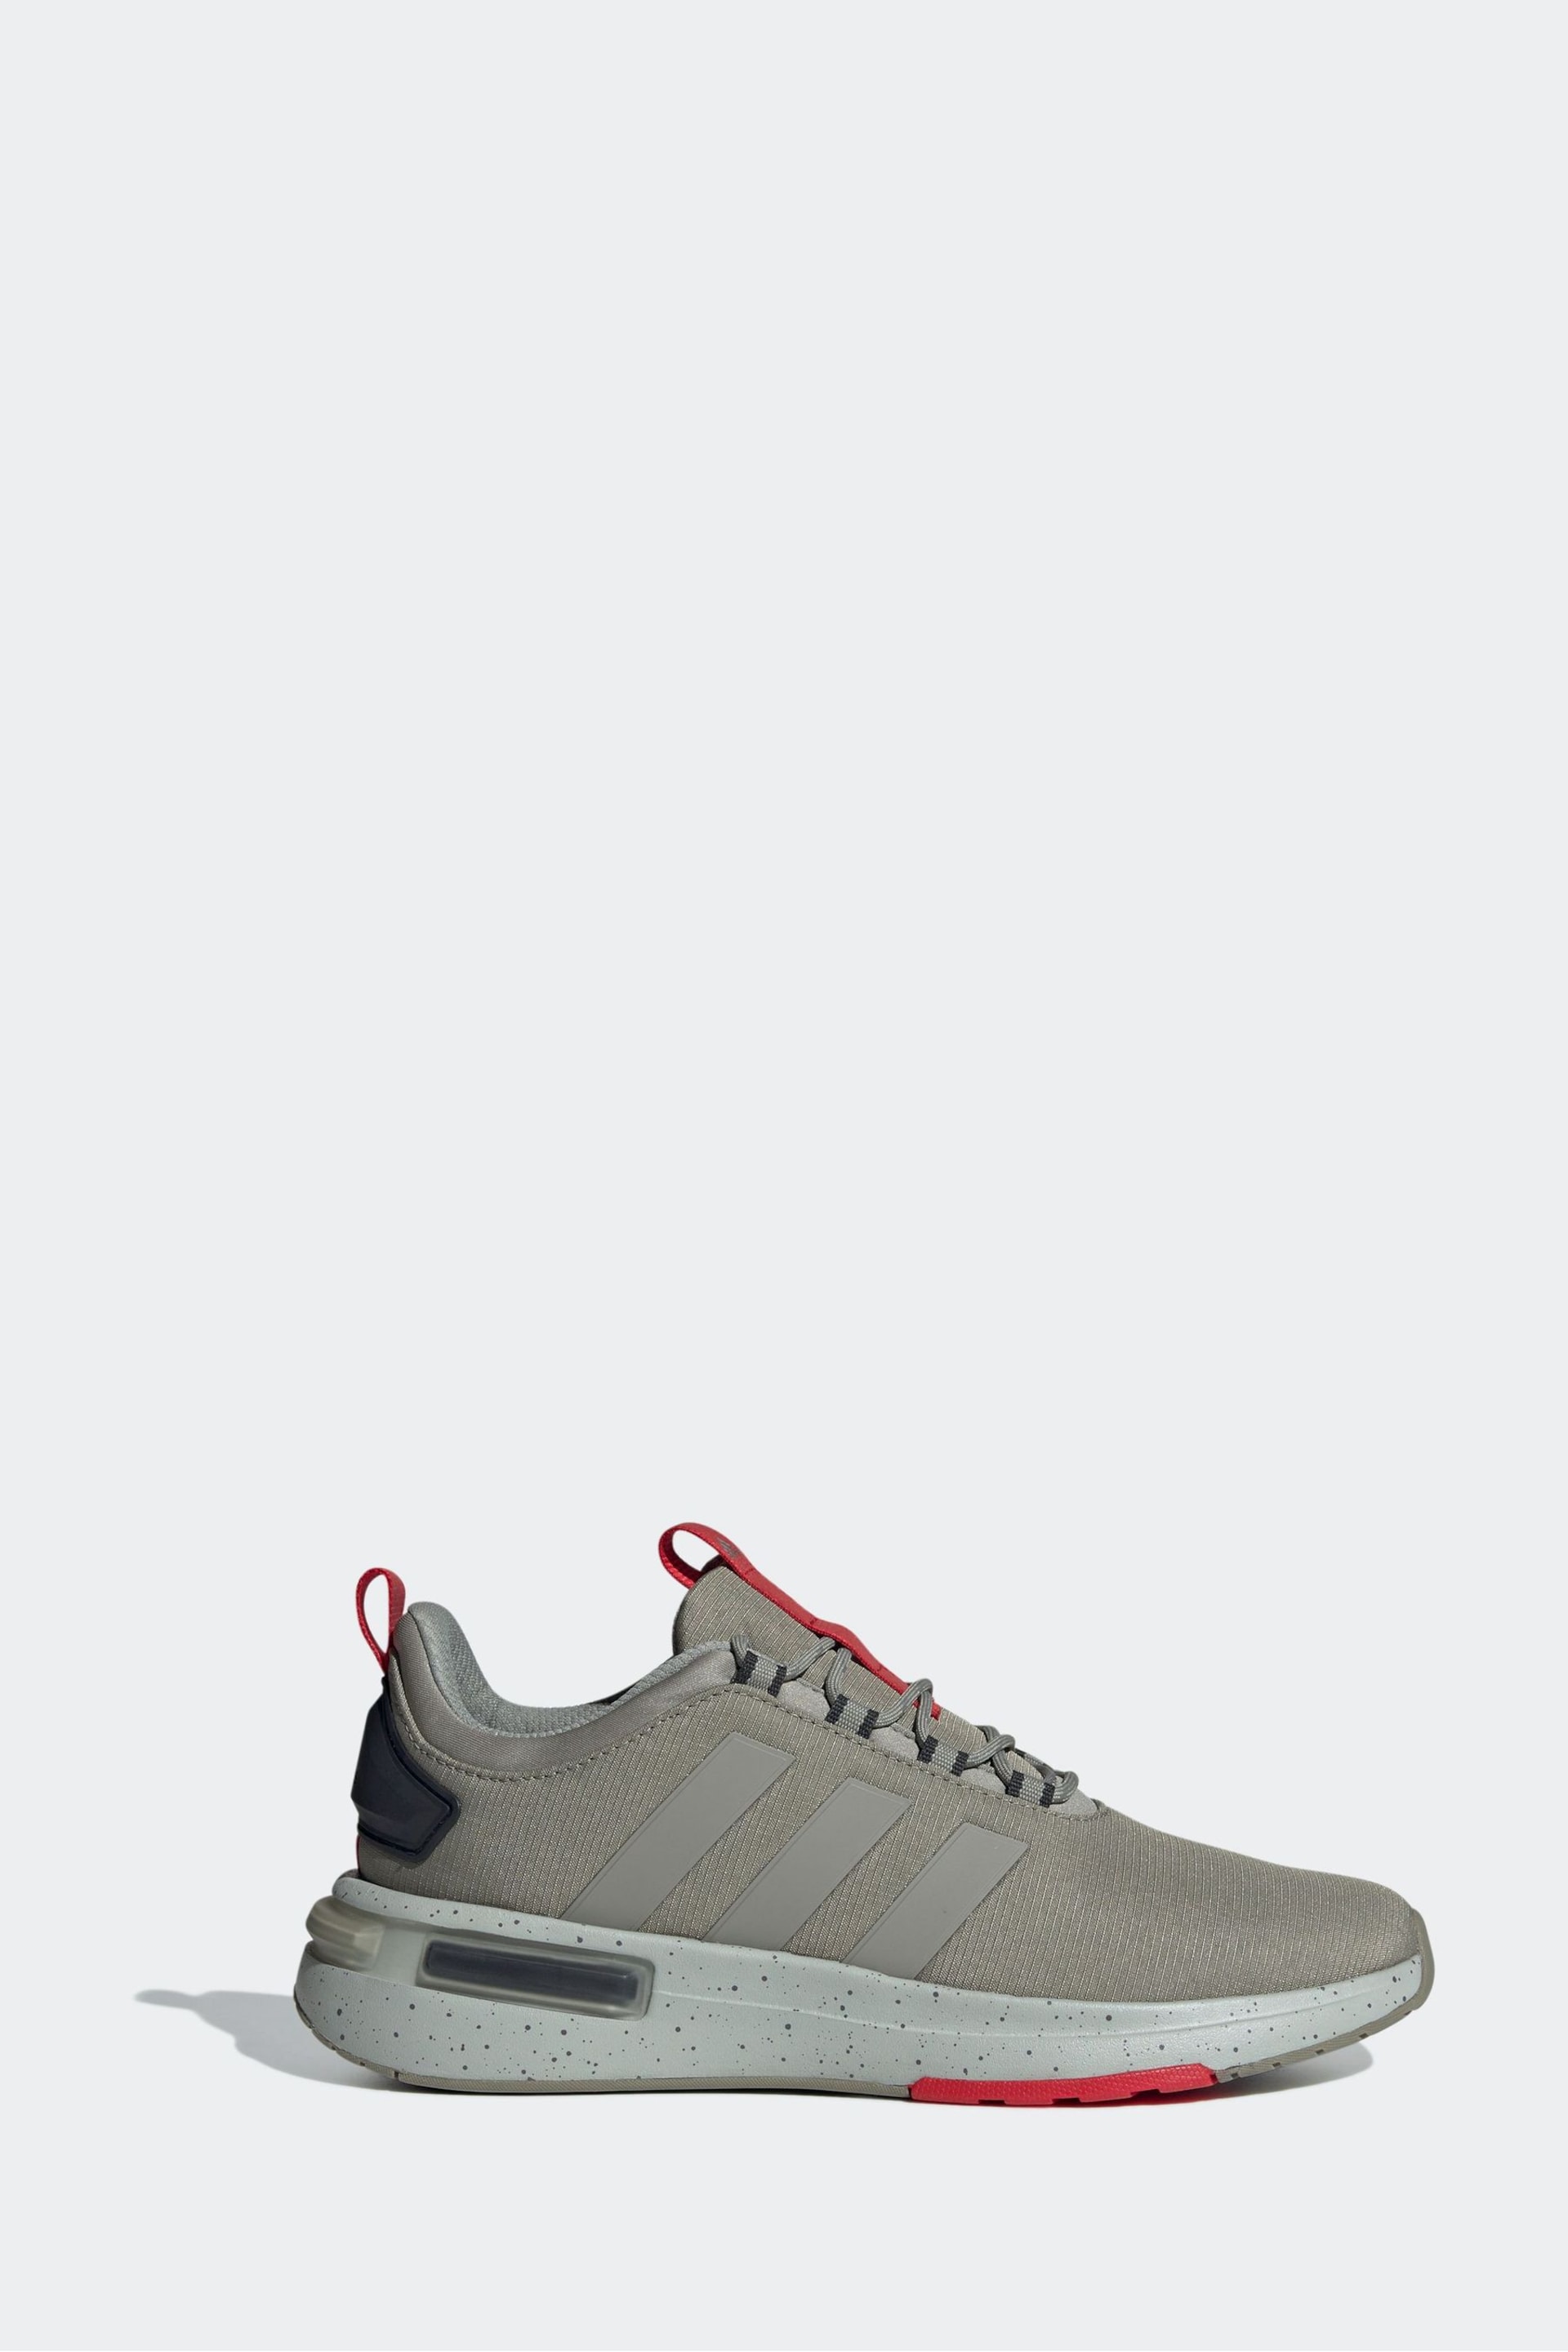 adidas Green Sportswear Racer TR23 Trainers - Image 1 of 8